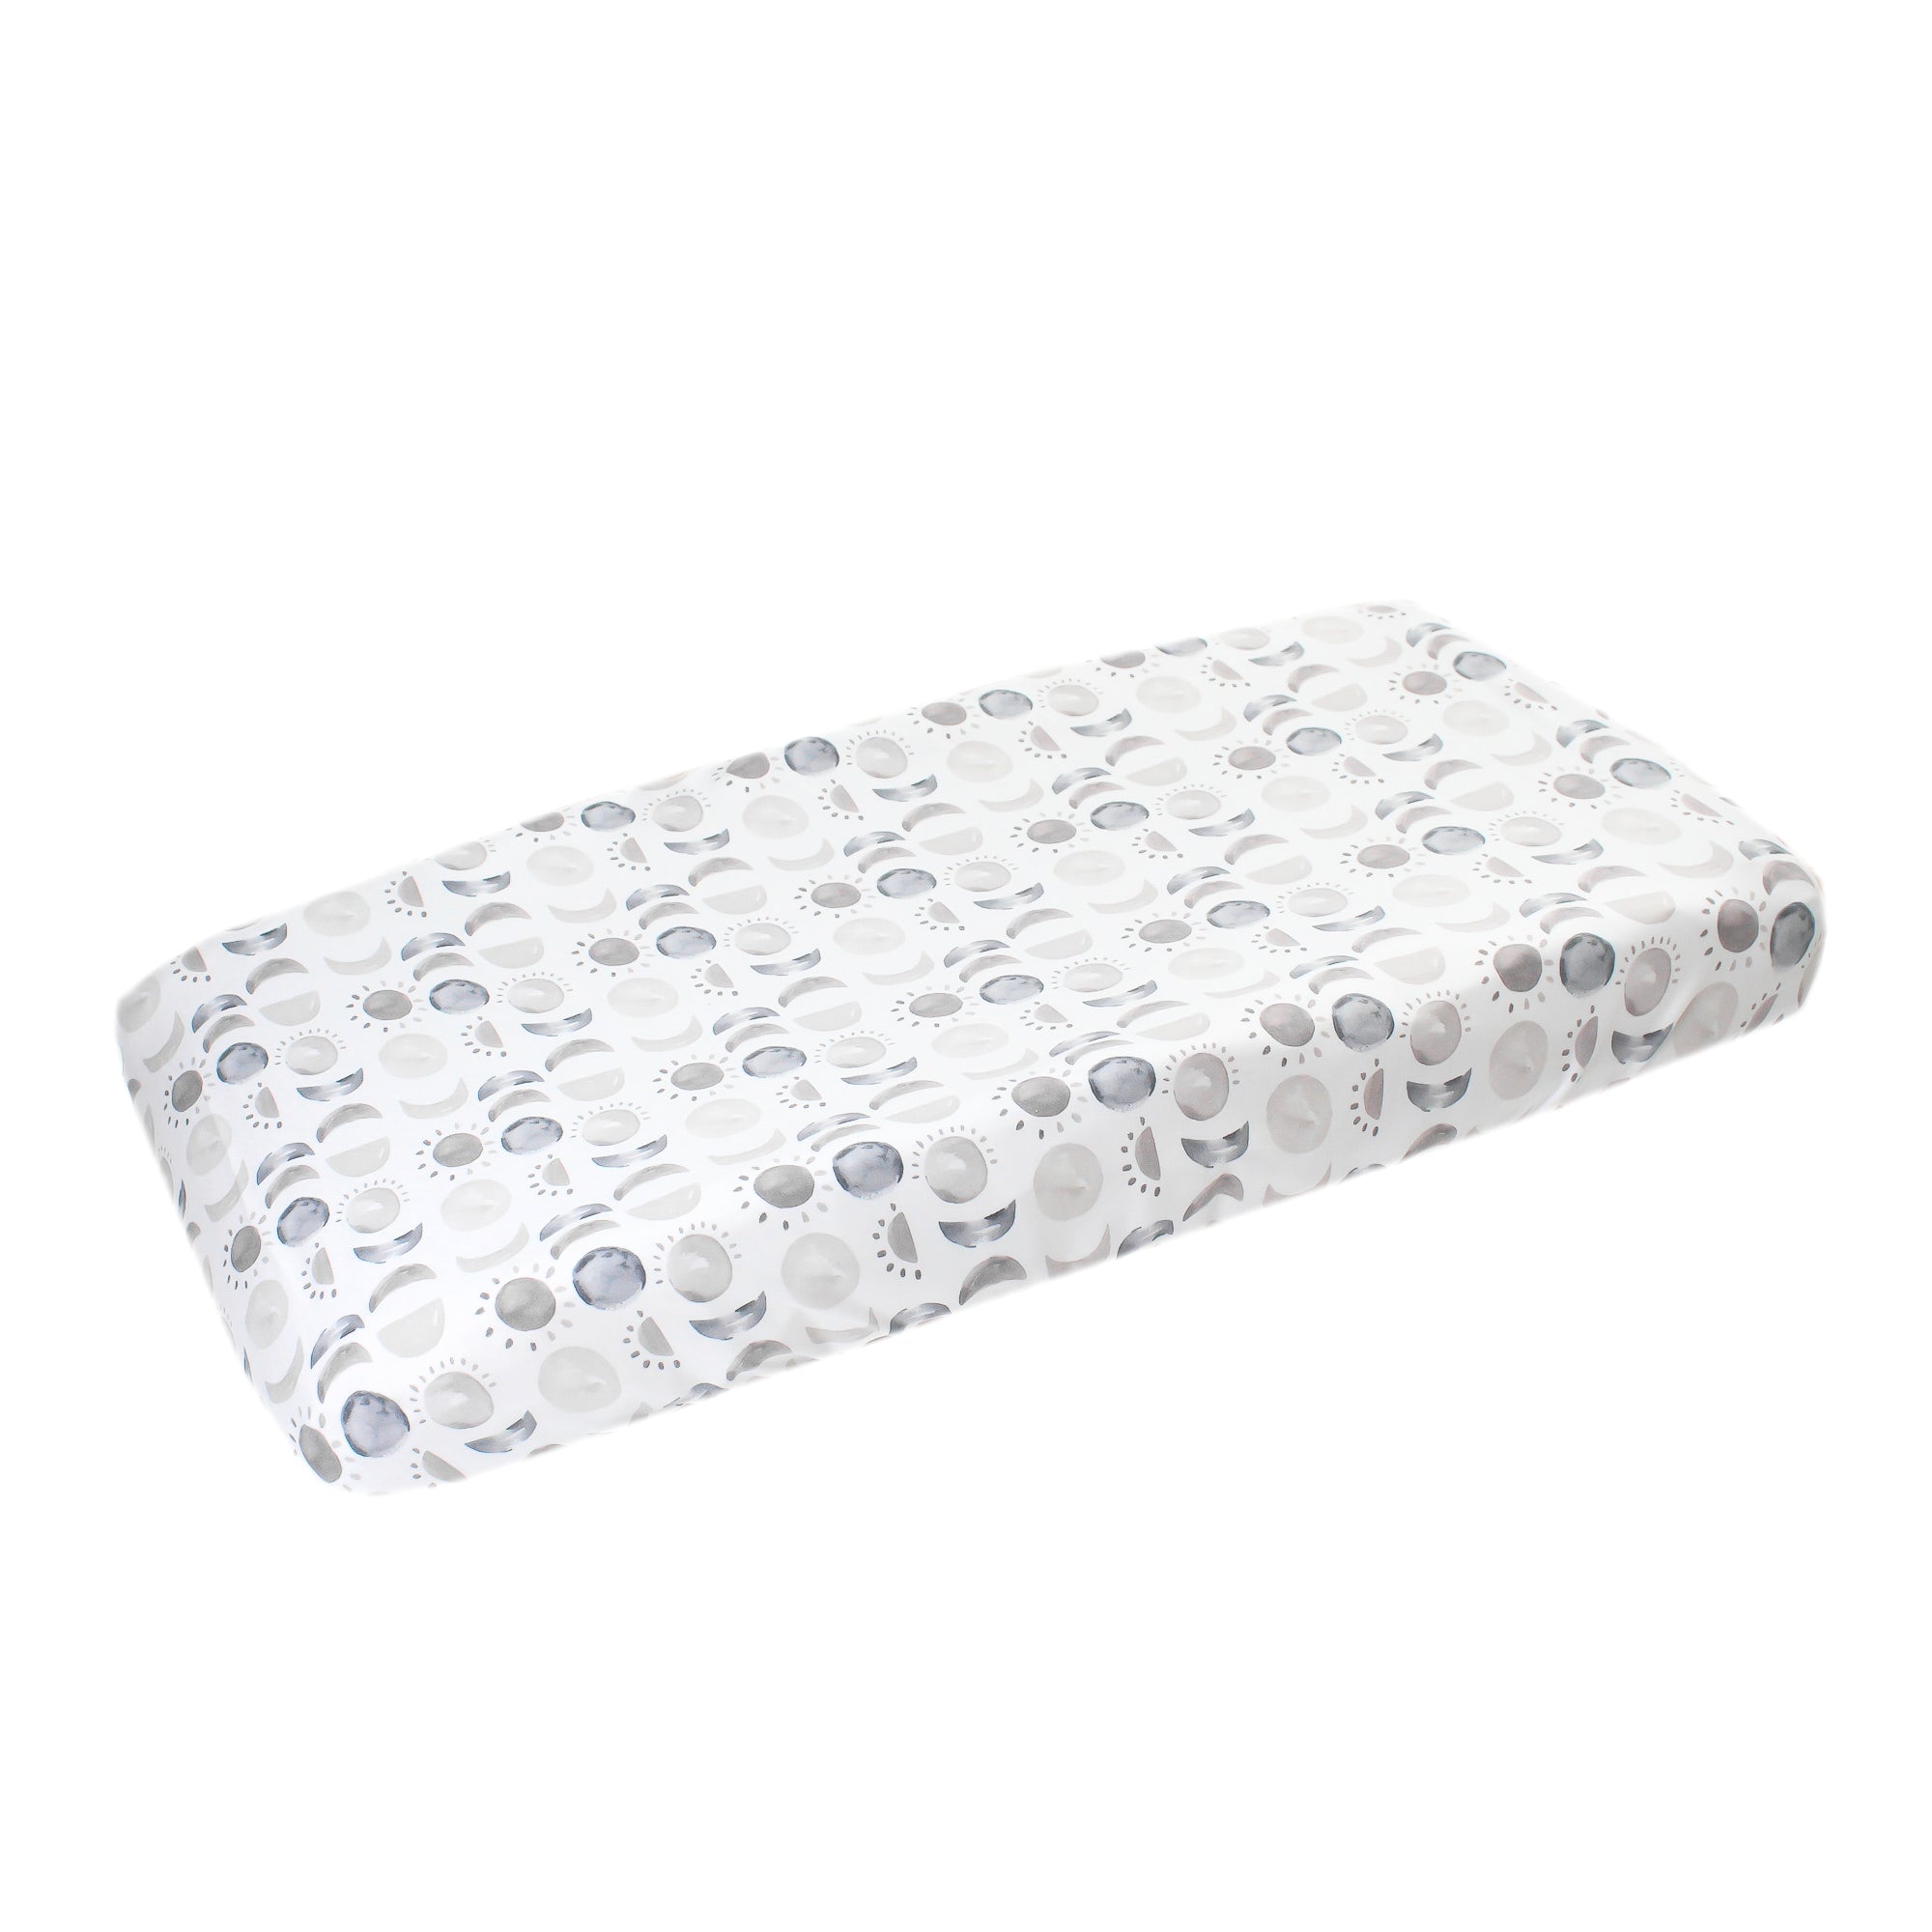 Premium Knit Diaper Changing Pad Cover - Eclipse